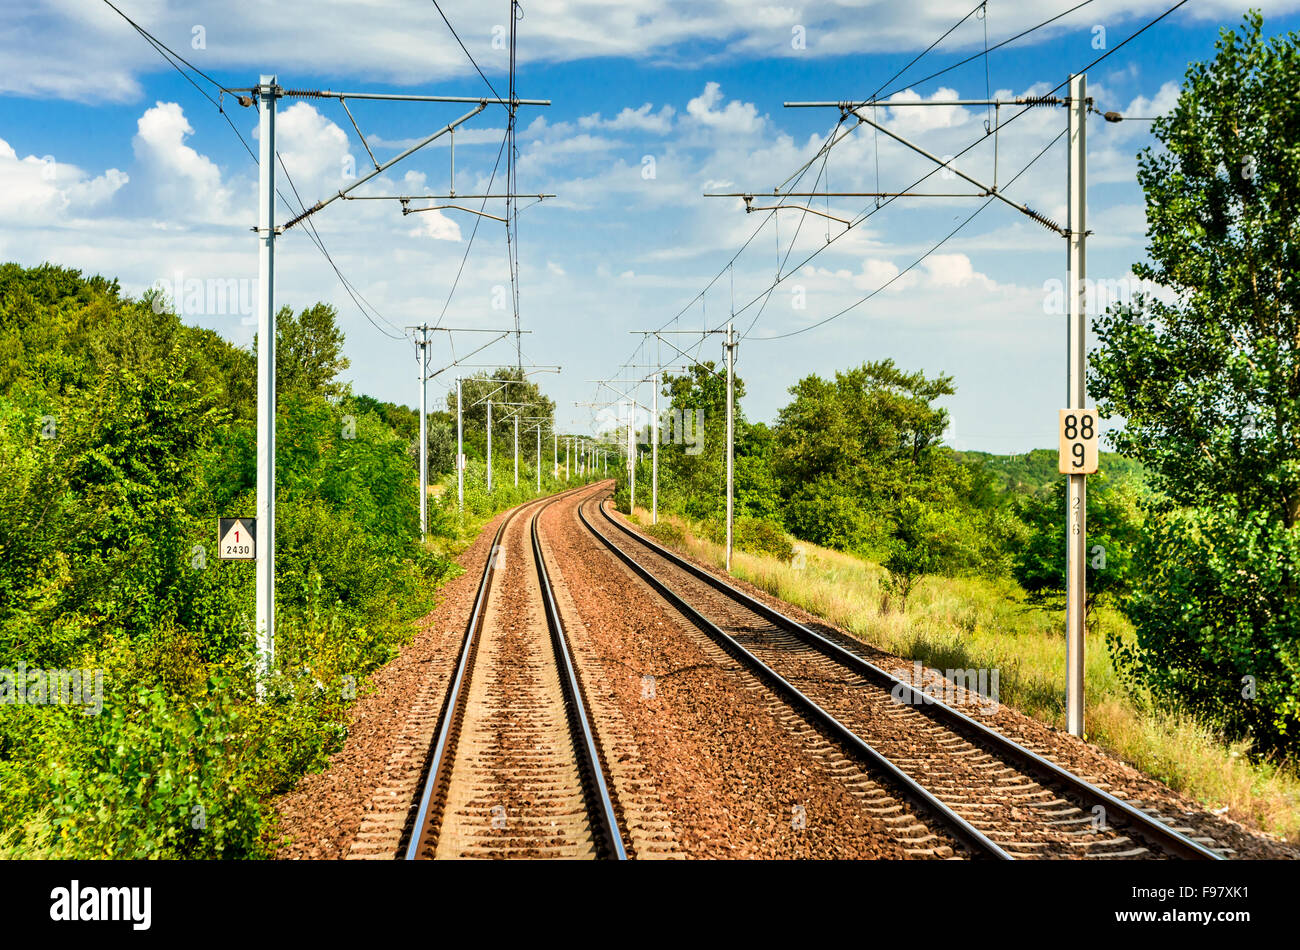 Amazing railway landscape in Romania with double electrified tracks in summer cloudy scenery. Stock Photo